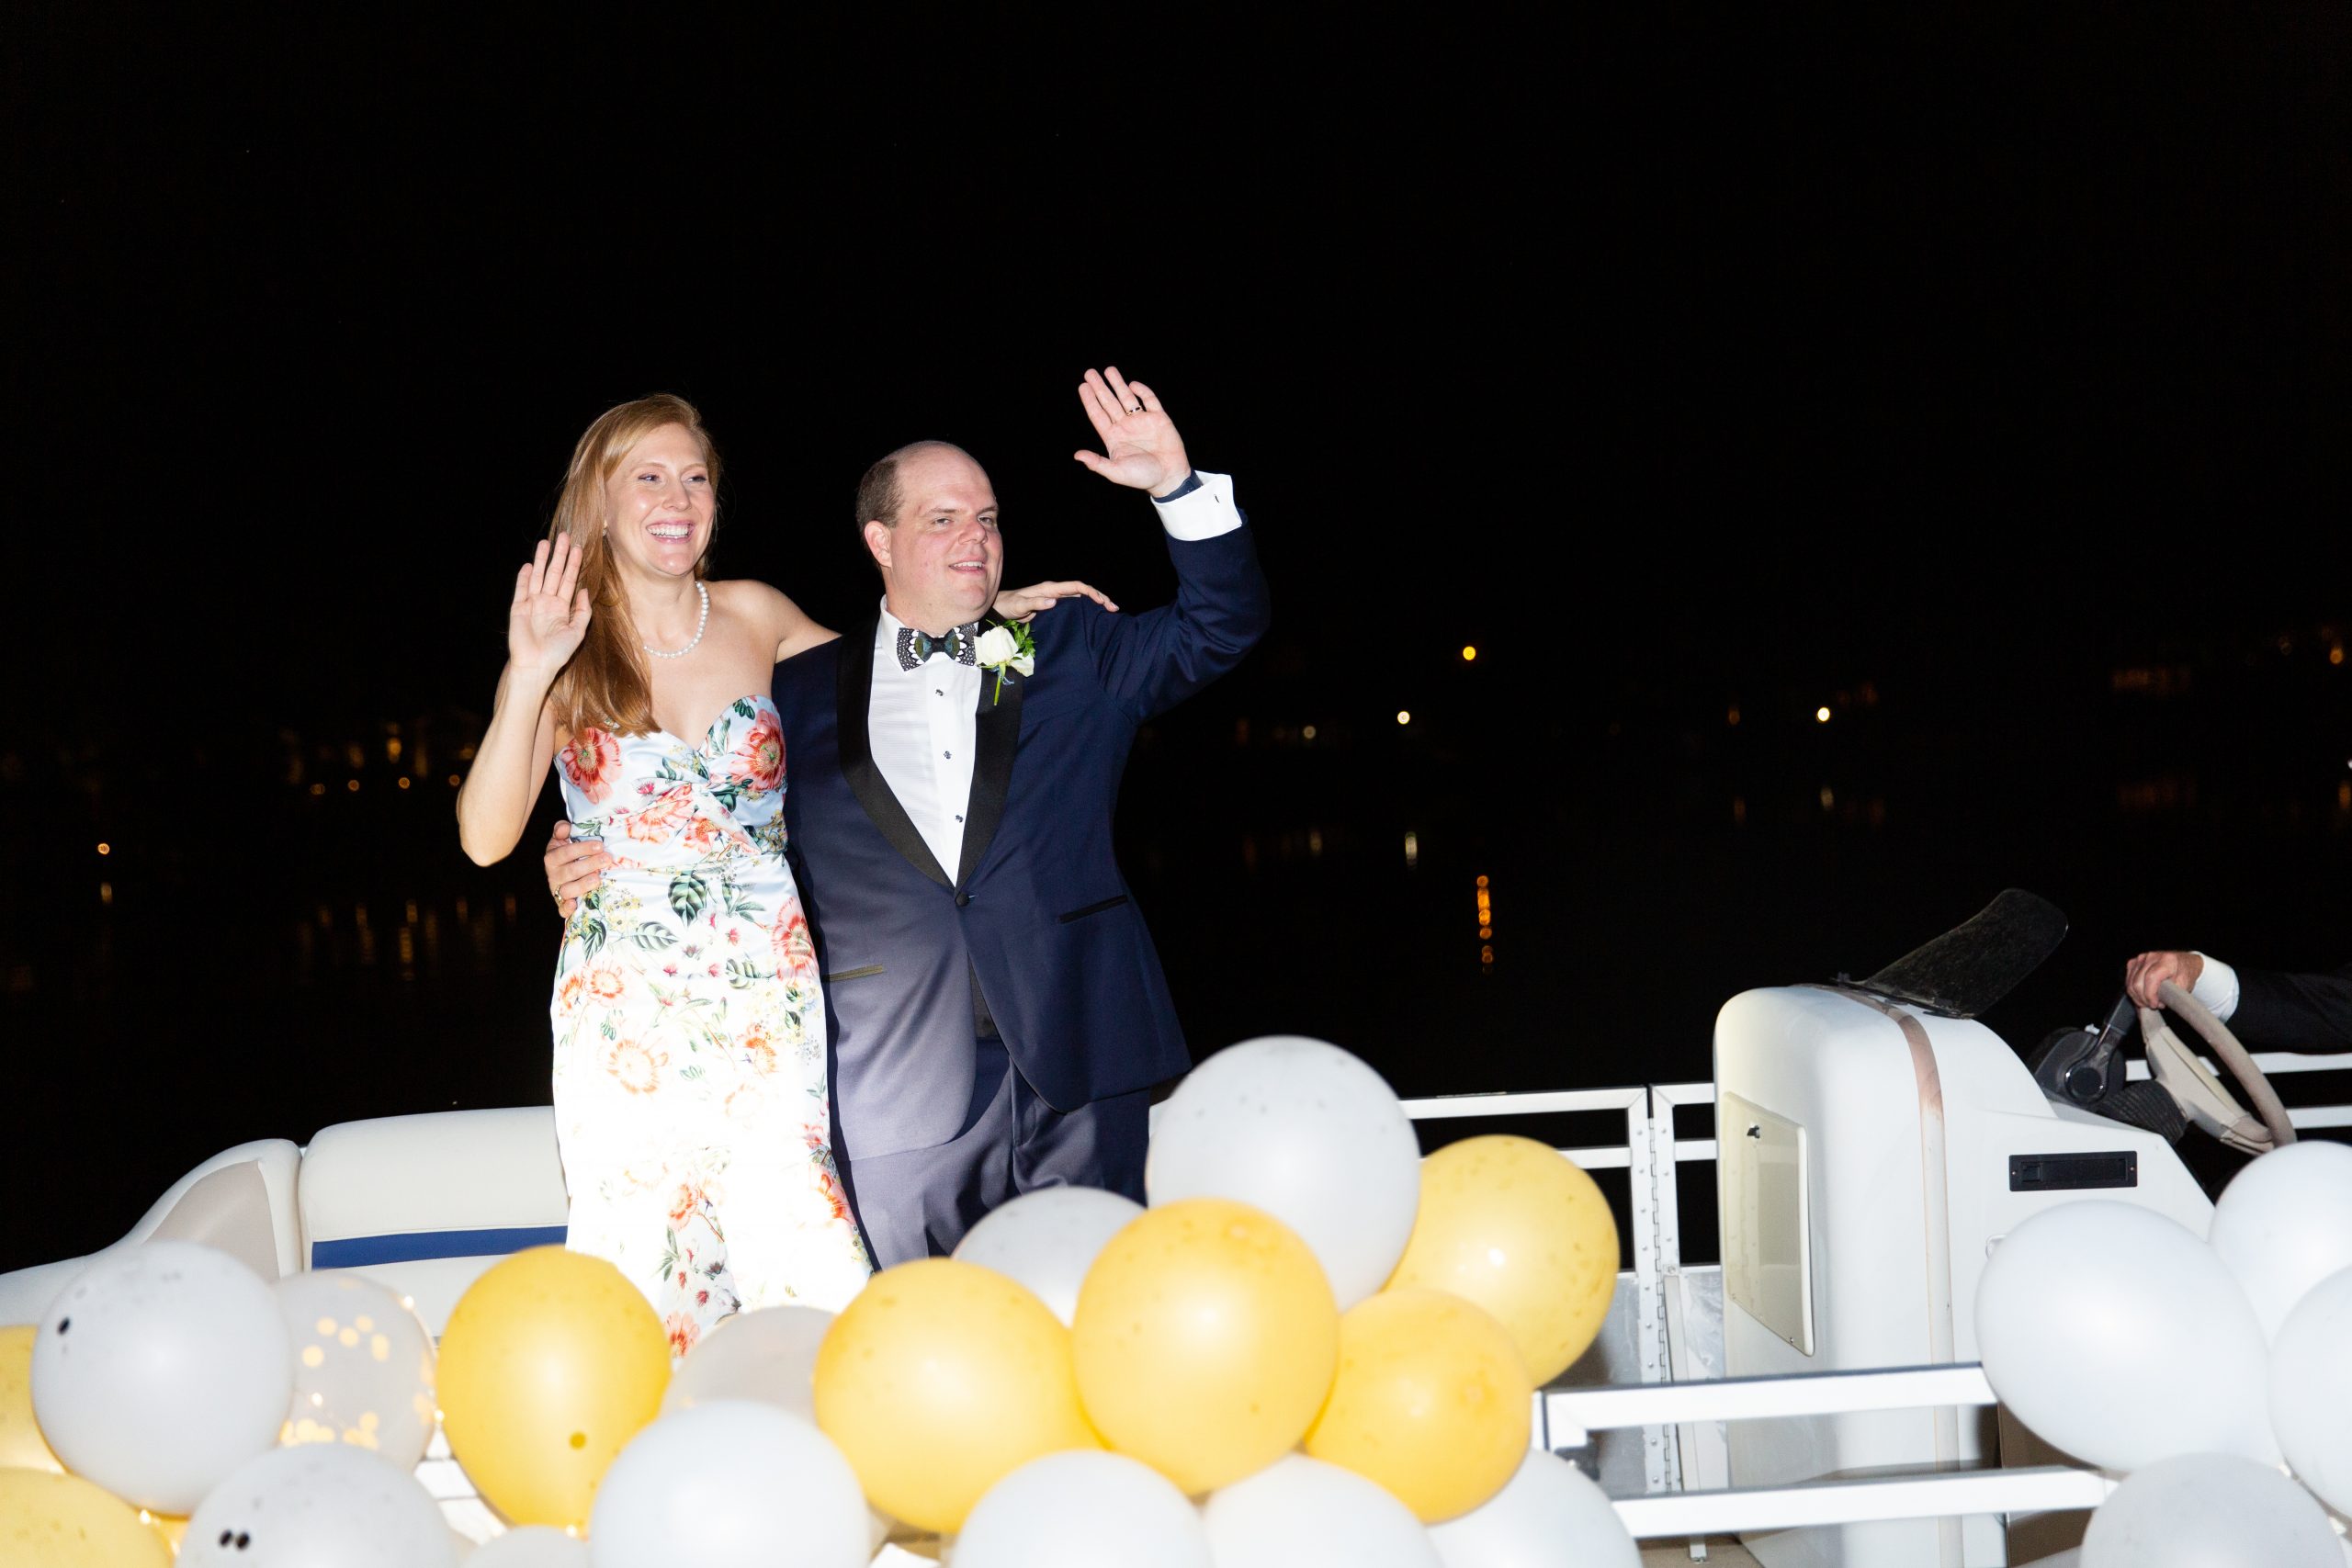 Katherine and William made their way down to their getaway boat, a balloon festooned pontoon that had been decorated by the bride’s cousins. It was piloted by stepfather Fred Crawford and first mate Edward Grimsley, the groom’s nephew.